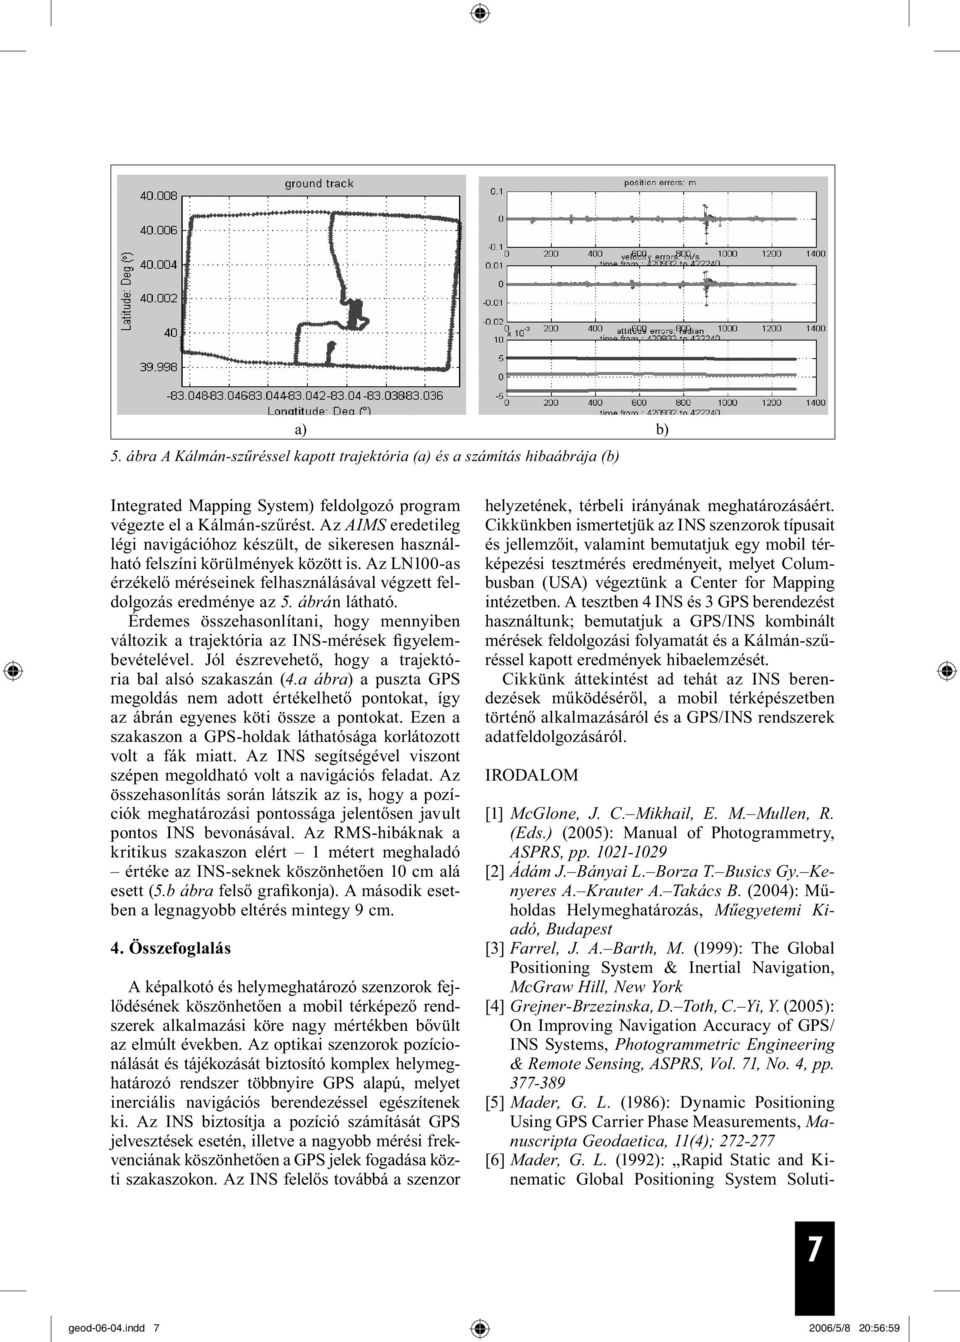 Toth, C. Yi, Y. (2005): On Improving Navigation Accuracy of GPS/ INS Systems, Photogrammetric Engineering & Remote Sensing, ASPRS, Vol. 71, No. 4, pp. 377-389 [5] Mader, G. L.